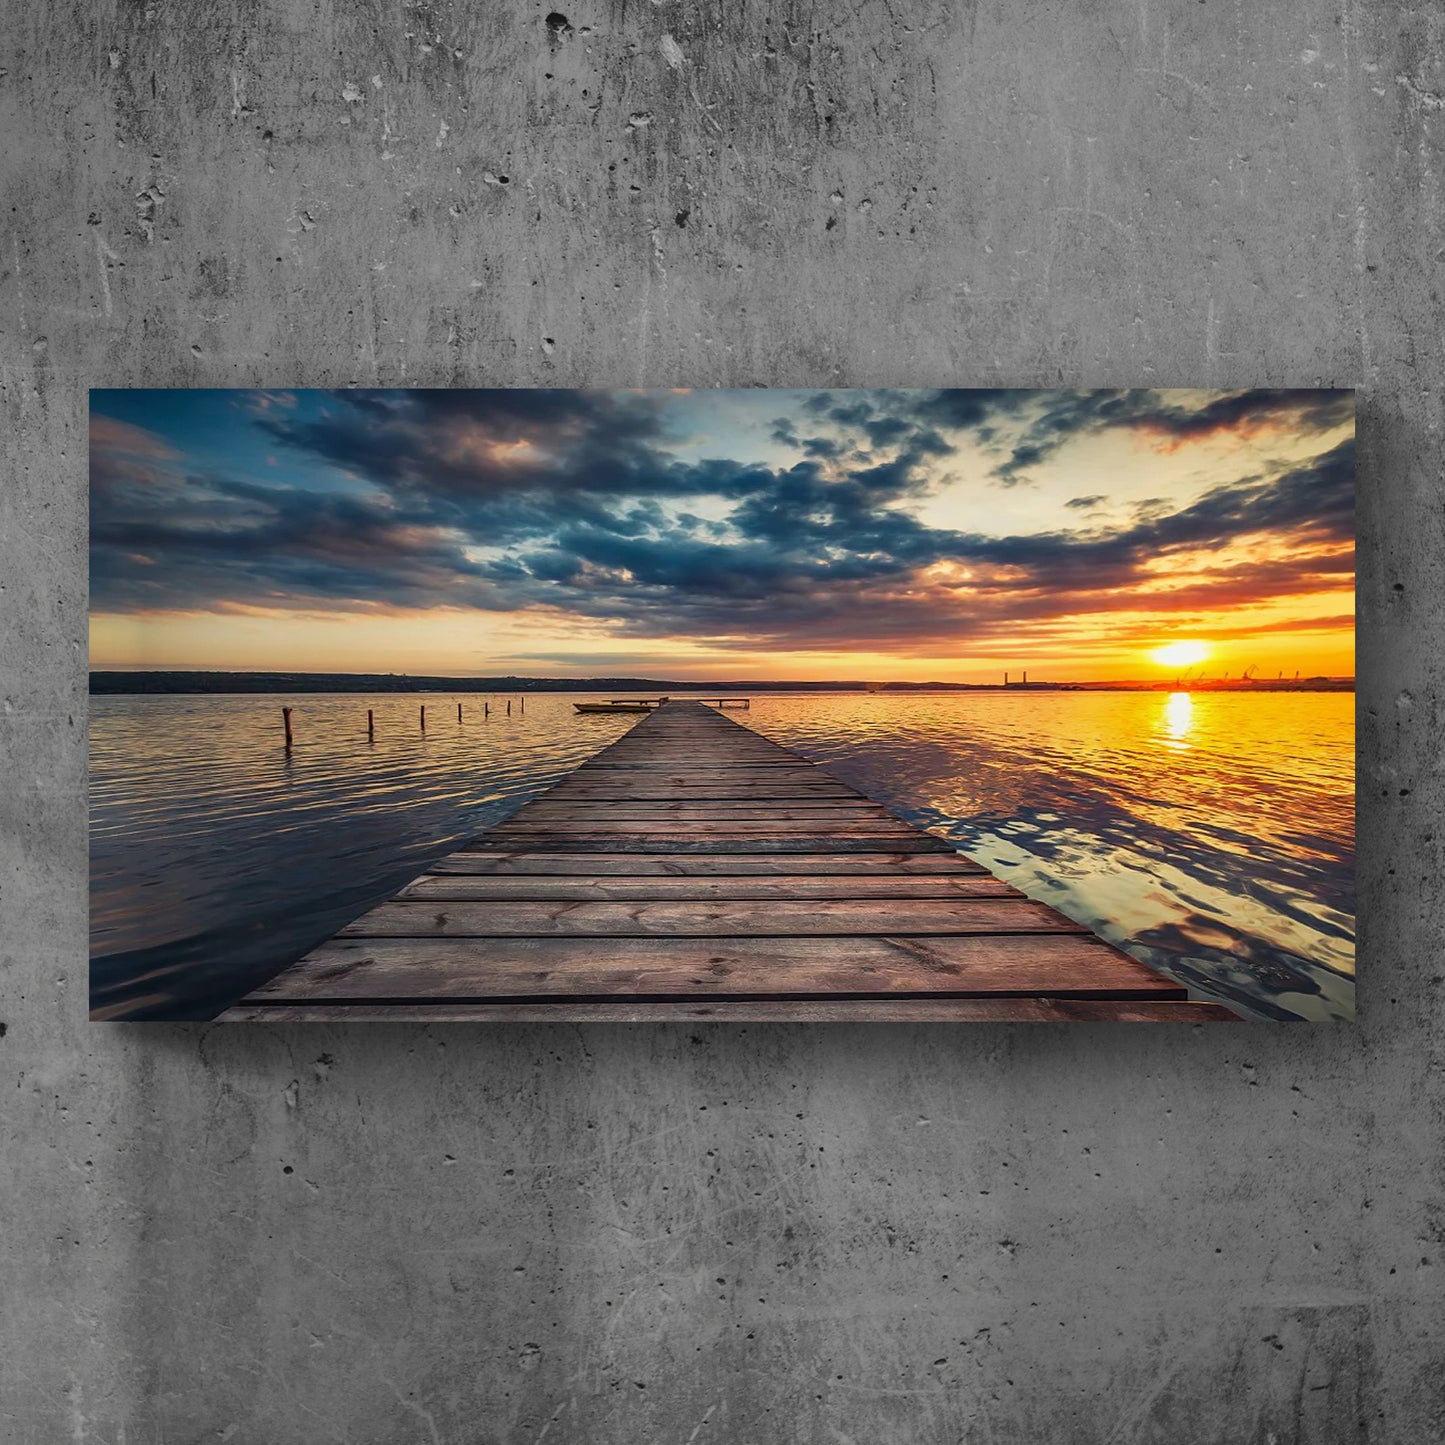 Small Dock By The Vibrant Lake Canvas Wall Art